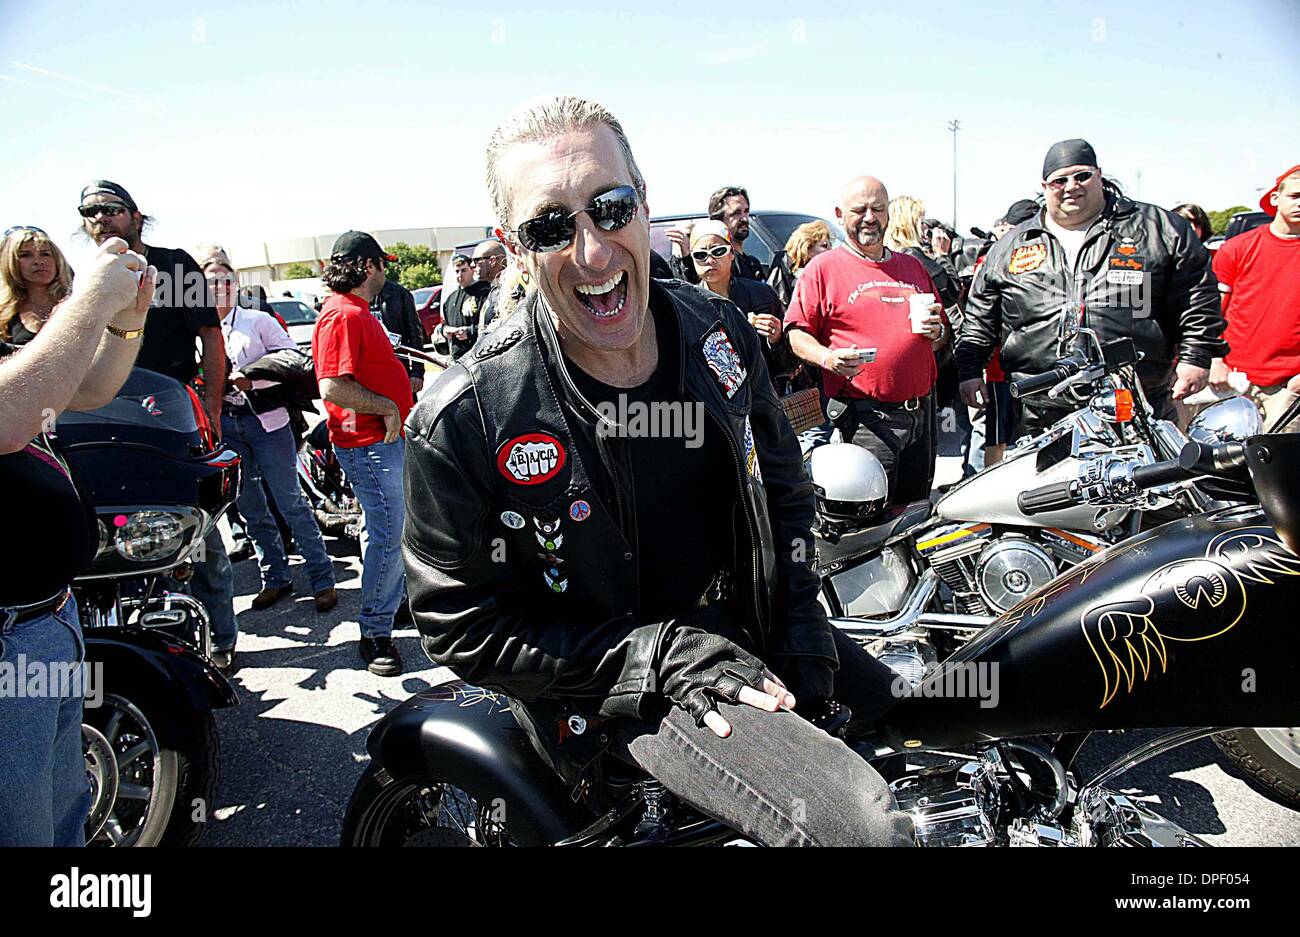 May 21, 2006 - New York, New York, U.S. - Dee Snider front man for ''Twisted Sister '' rides his Von Dutch Custom Motorcycle for his 4th annual March of Dimes Bikers for Babies ride. Dee Snider with his Daughter and Son Cheyenne age 9 Shane 18 yrs.       2006     5/21/06    .K47987BC.4TH ANNUAL MARCH OF DIMES BIKERS FOR BABIES RIDE .05-21-2006.  -   2006.DEE SNIDER.CHEYENNE SNIDER. Stock Photo